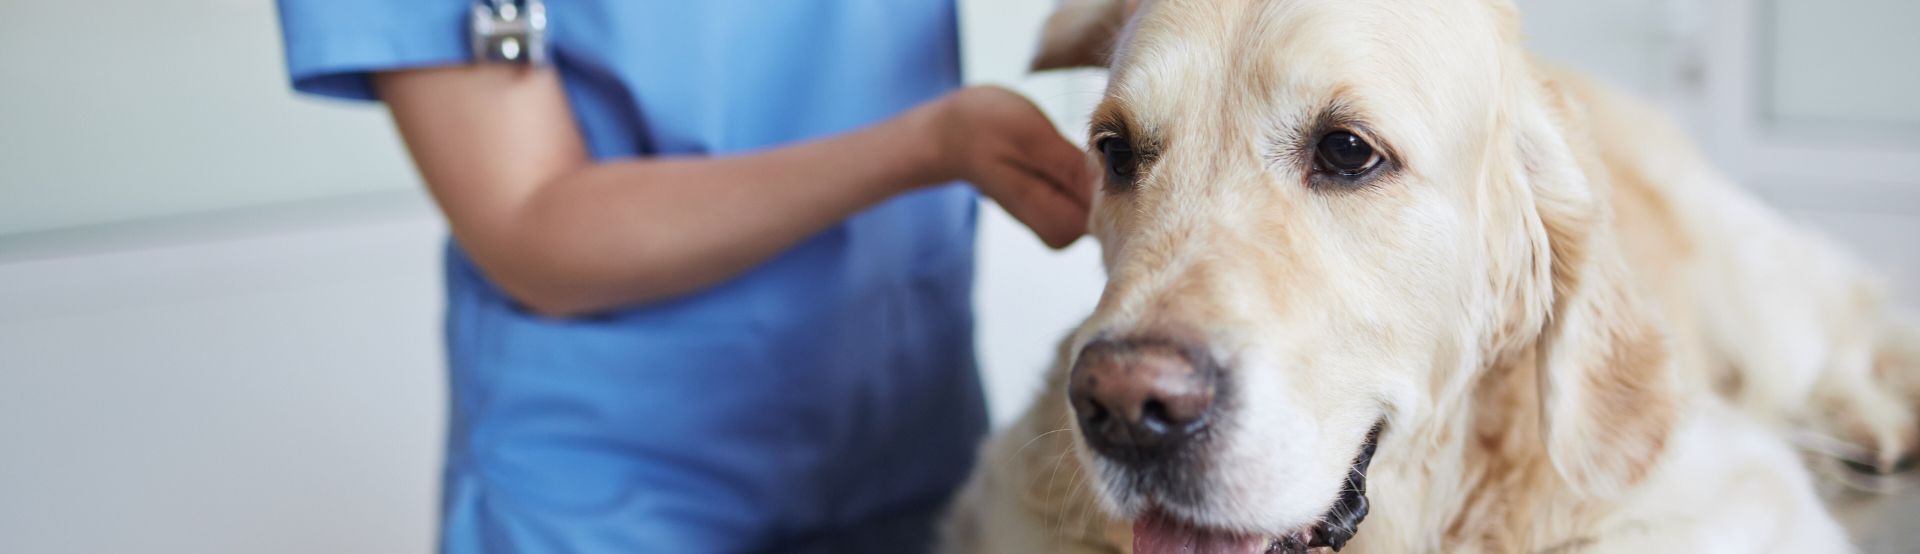 Post-authorisation pharmacovigilance services for veterinary medicinal products